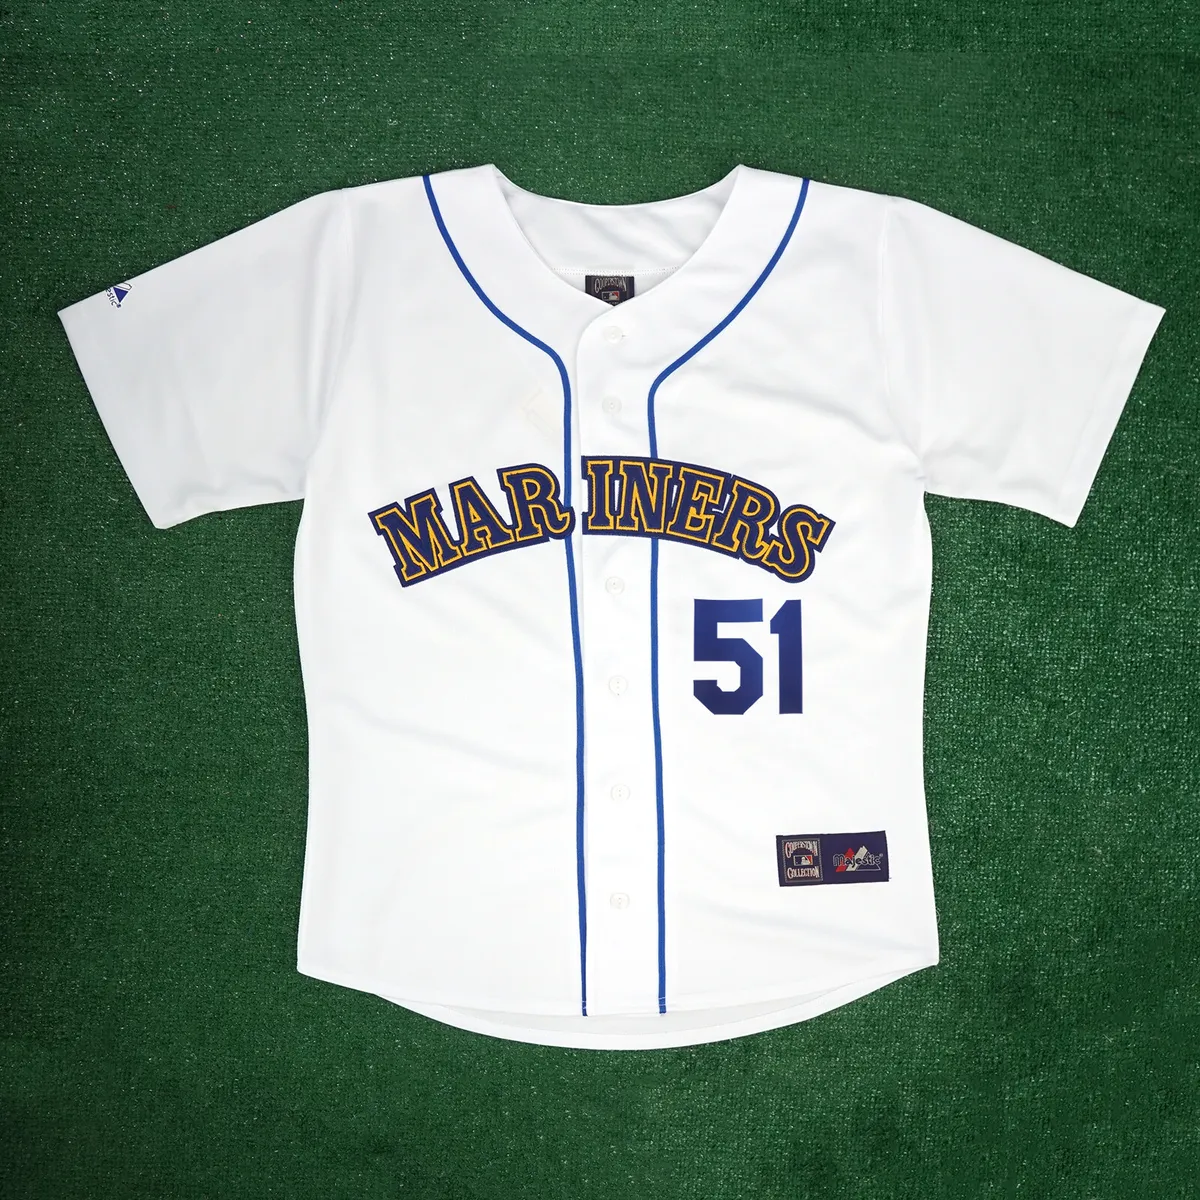 Randy Johnson 1989 Seattle Mariners Cooperstown Men's Home White Jersey